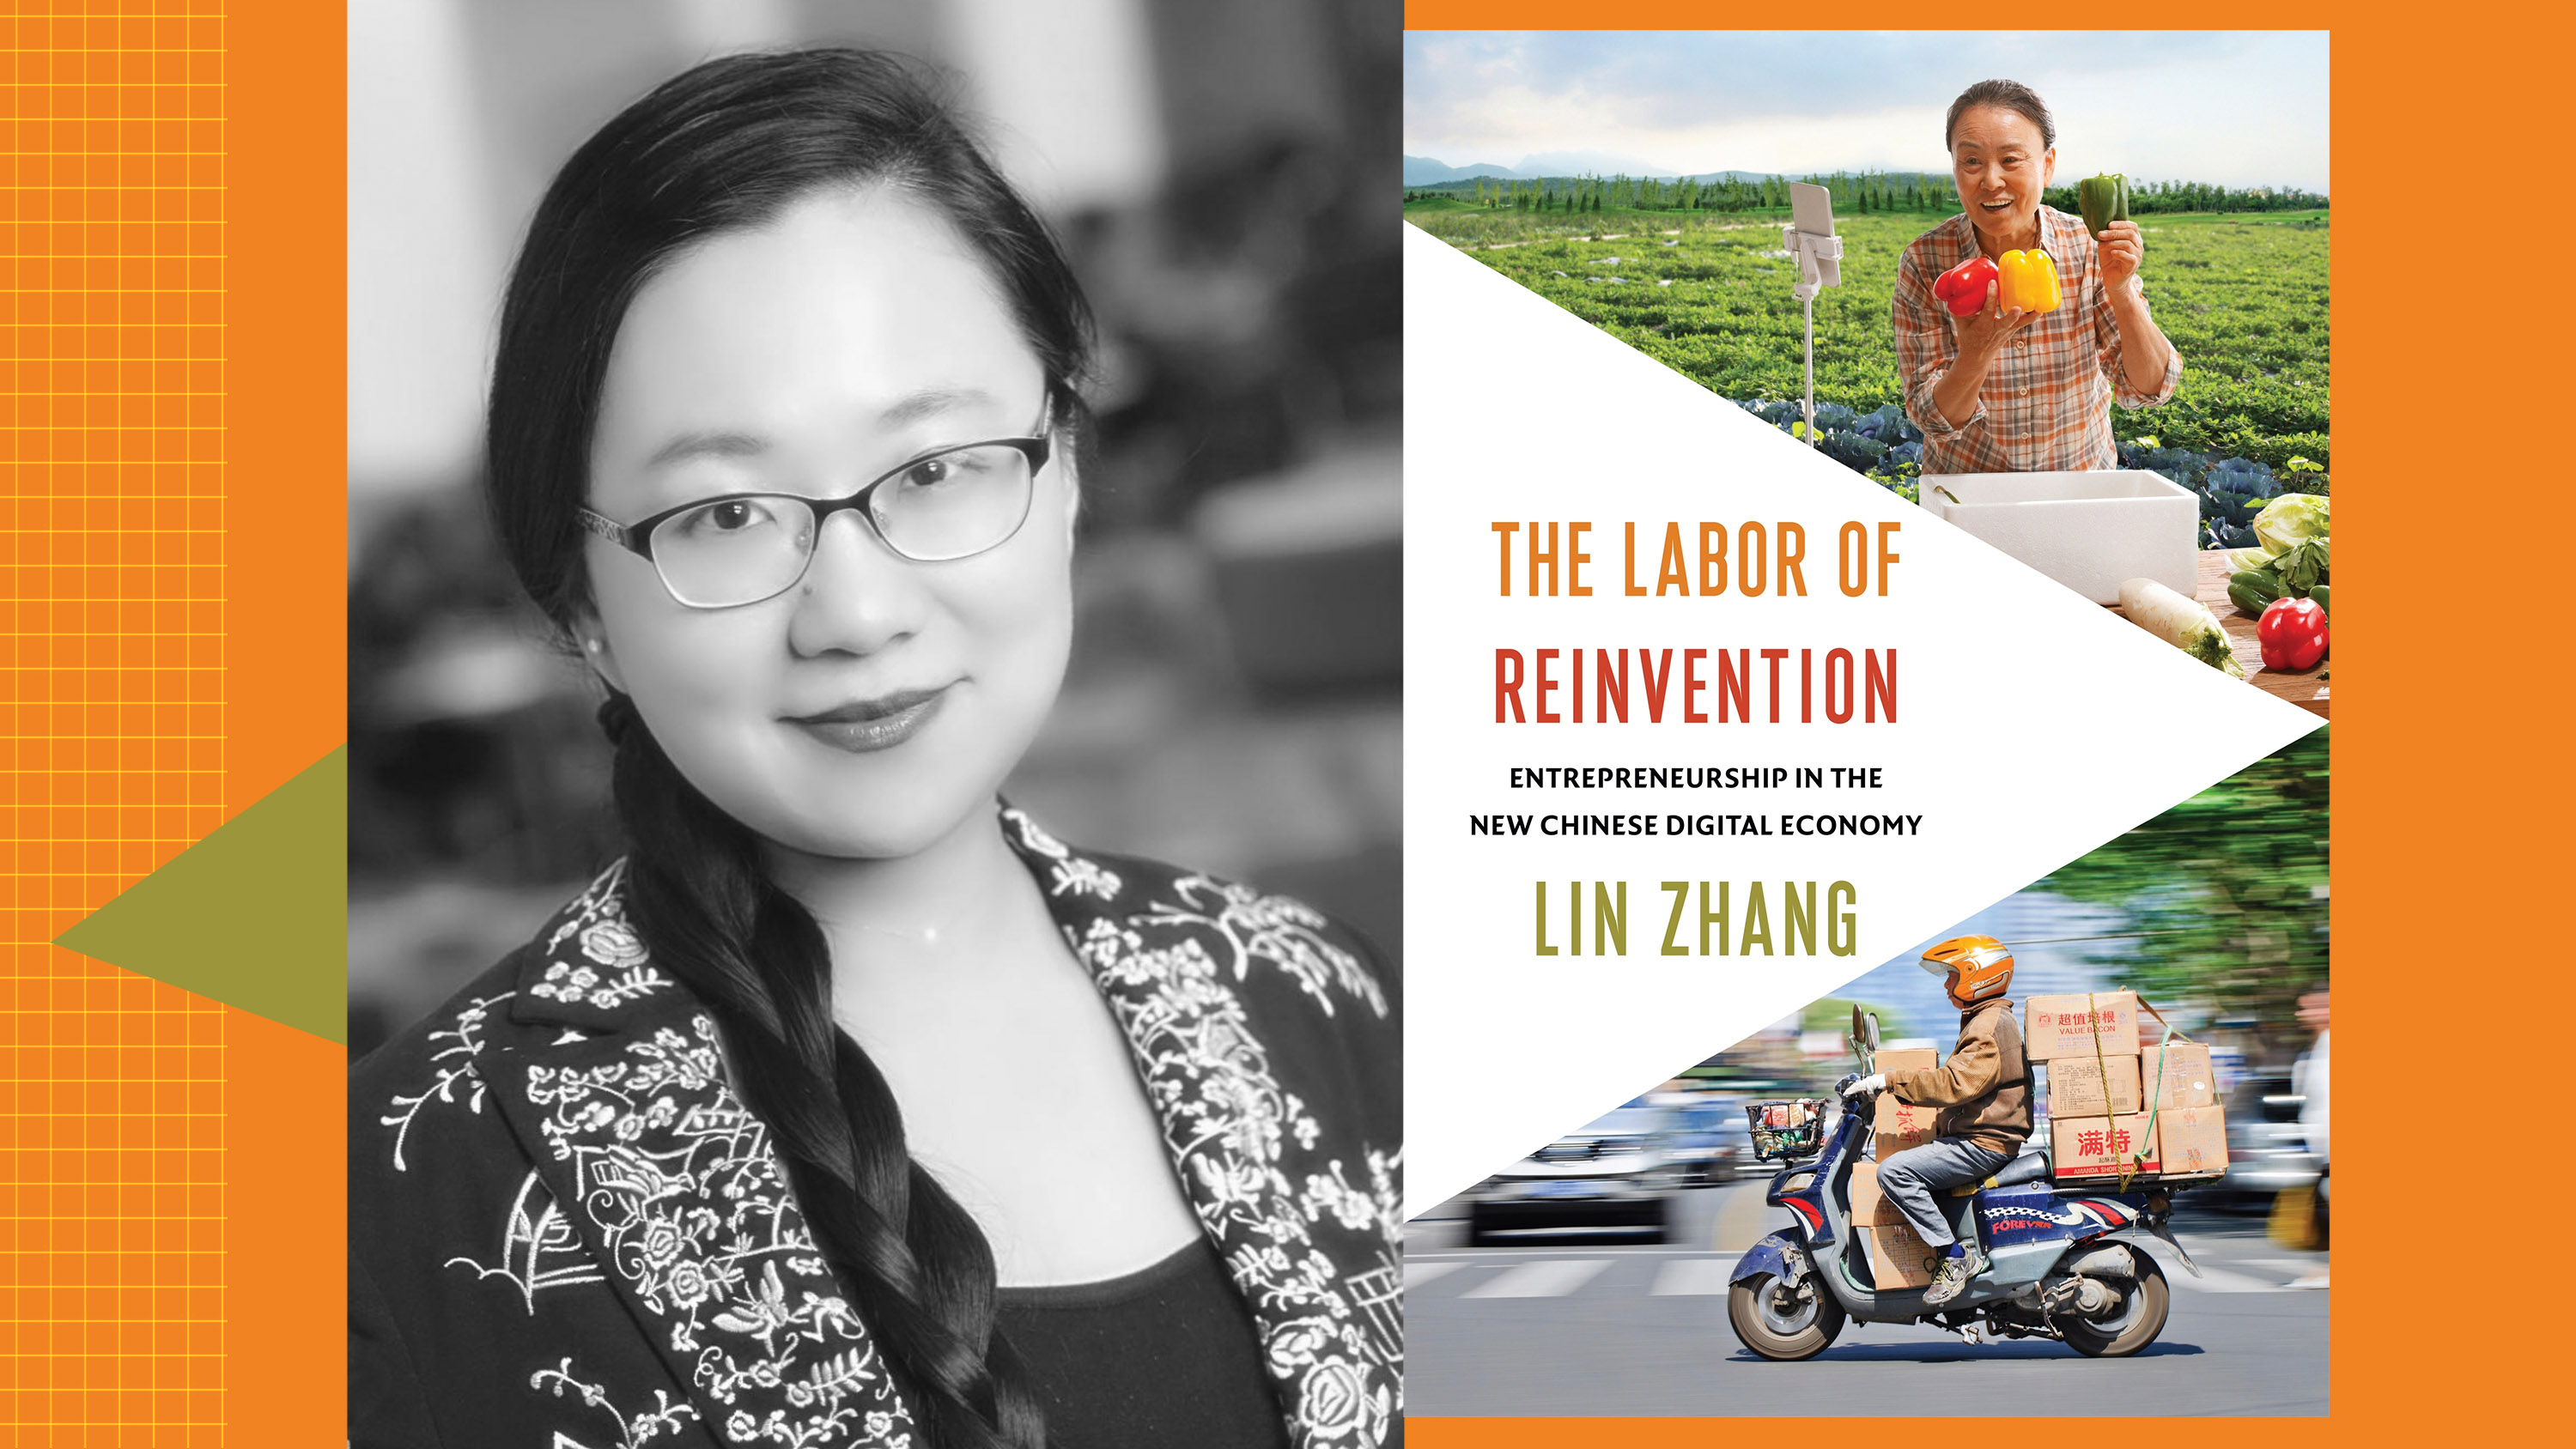 Lin Zhang&#039;s author headshot next to the cover of her book, &quot;The Labor of Reinvention.&quot;